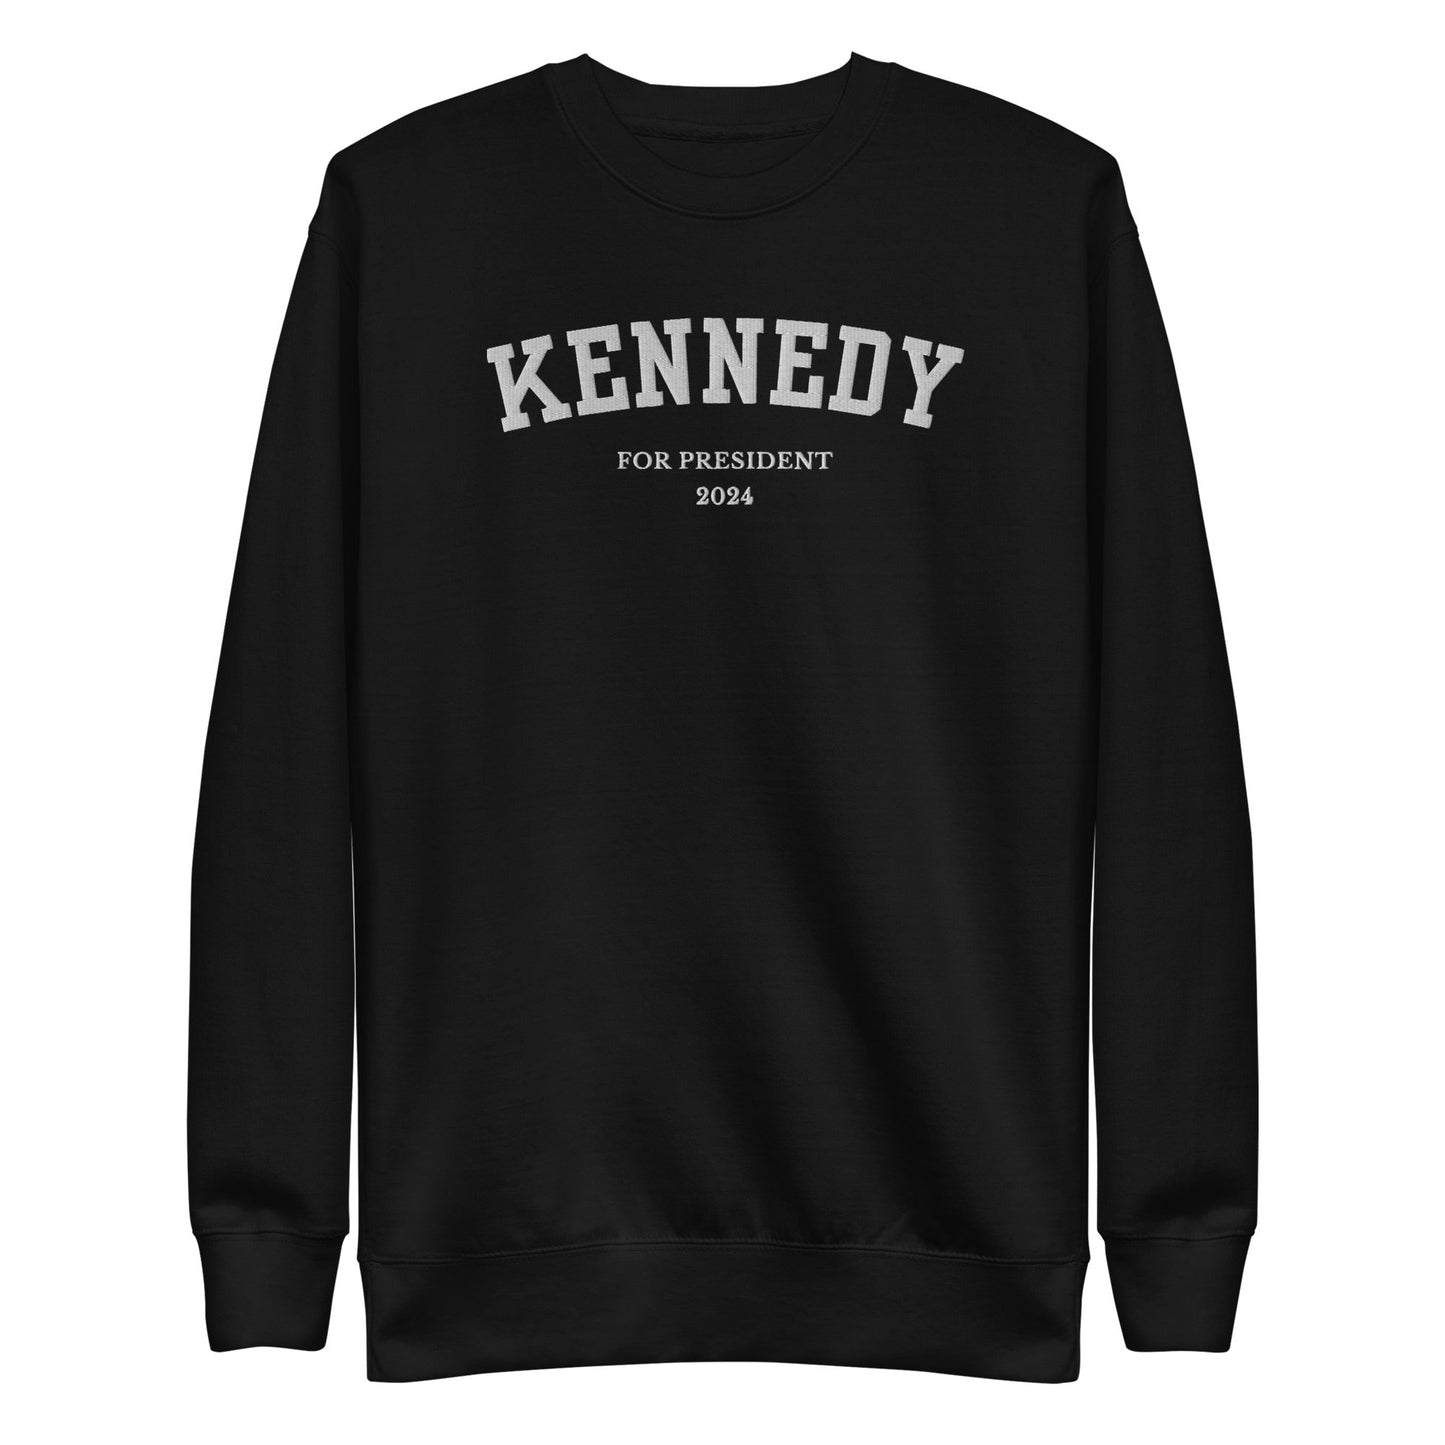 Kennedy for President Embroidered Collegiate Premium Sweatshirt - TEAM KENNEDY. All rights reserved